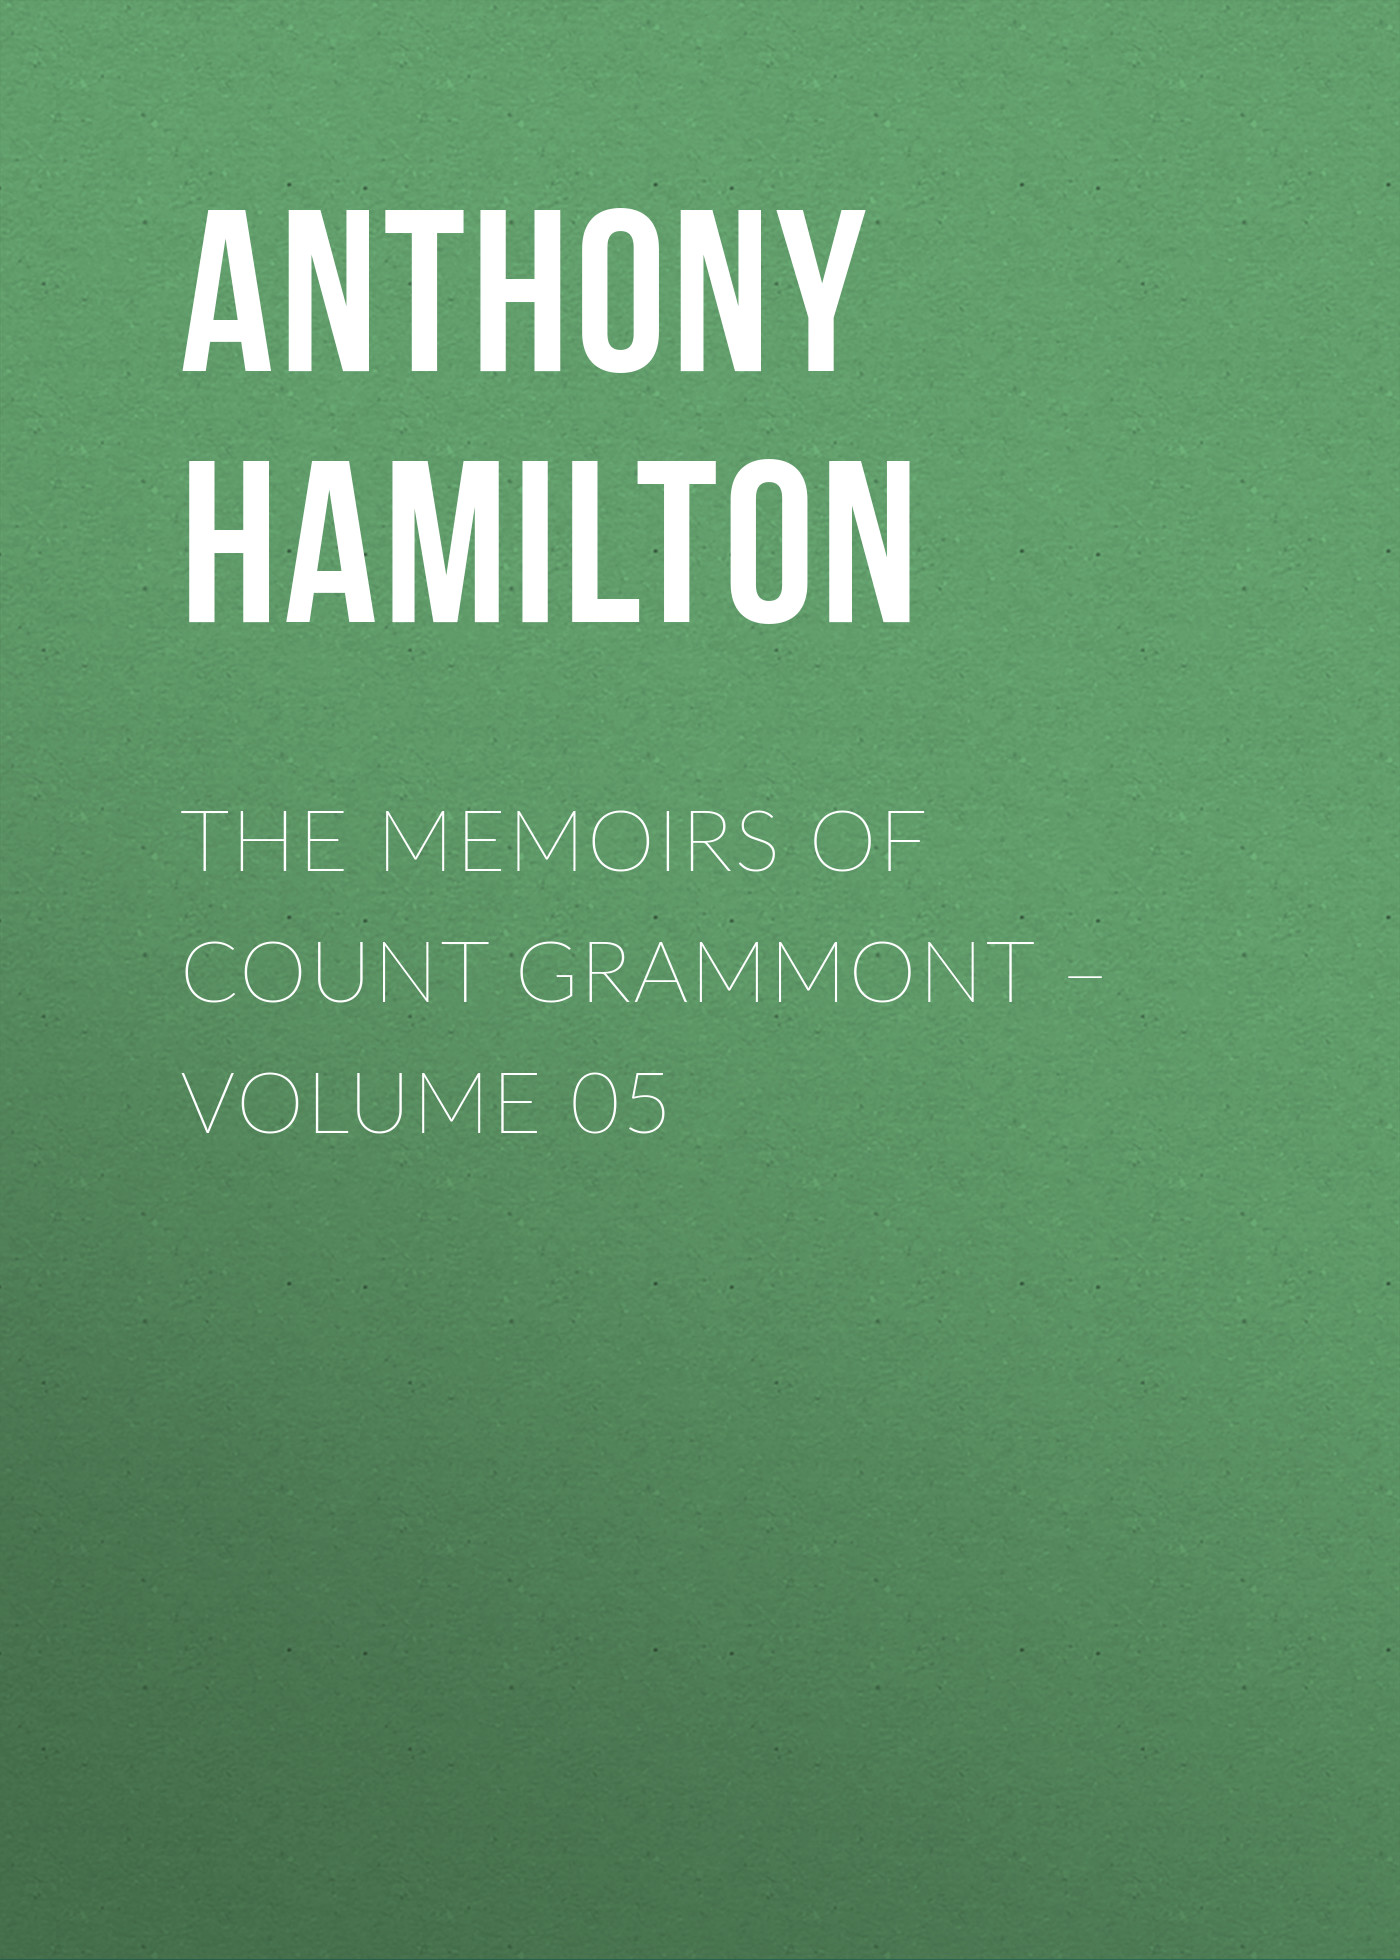 The Memoirs of Count Grammont– Volume 05